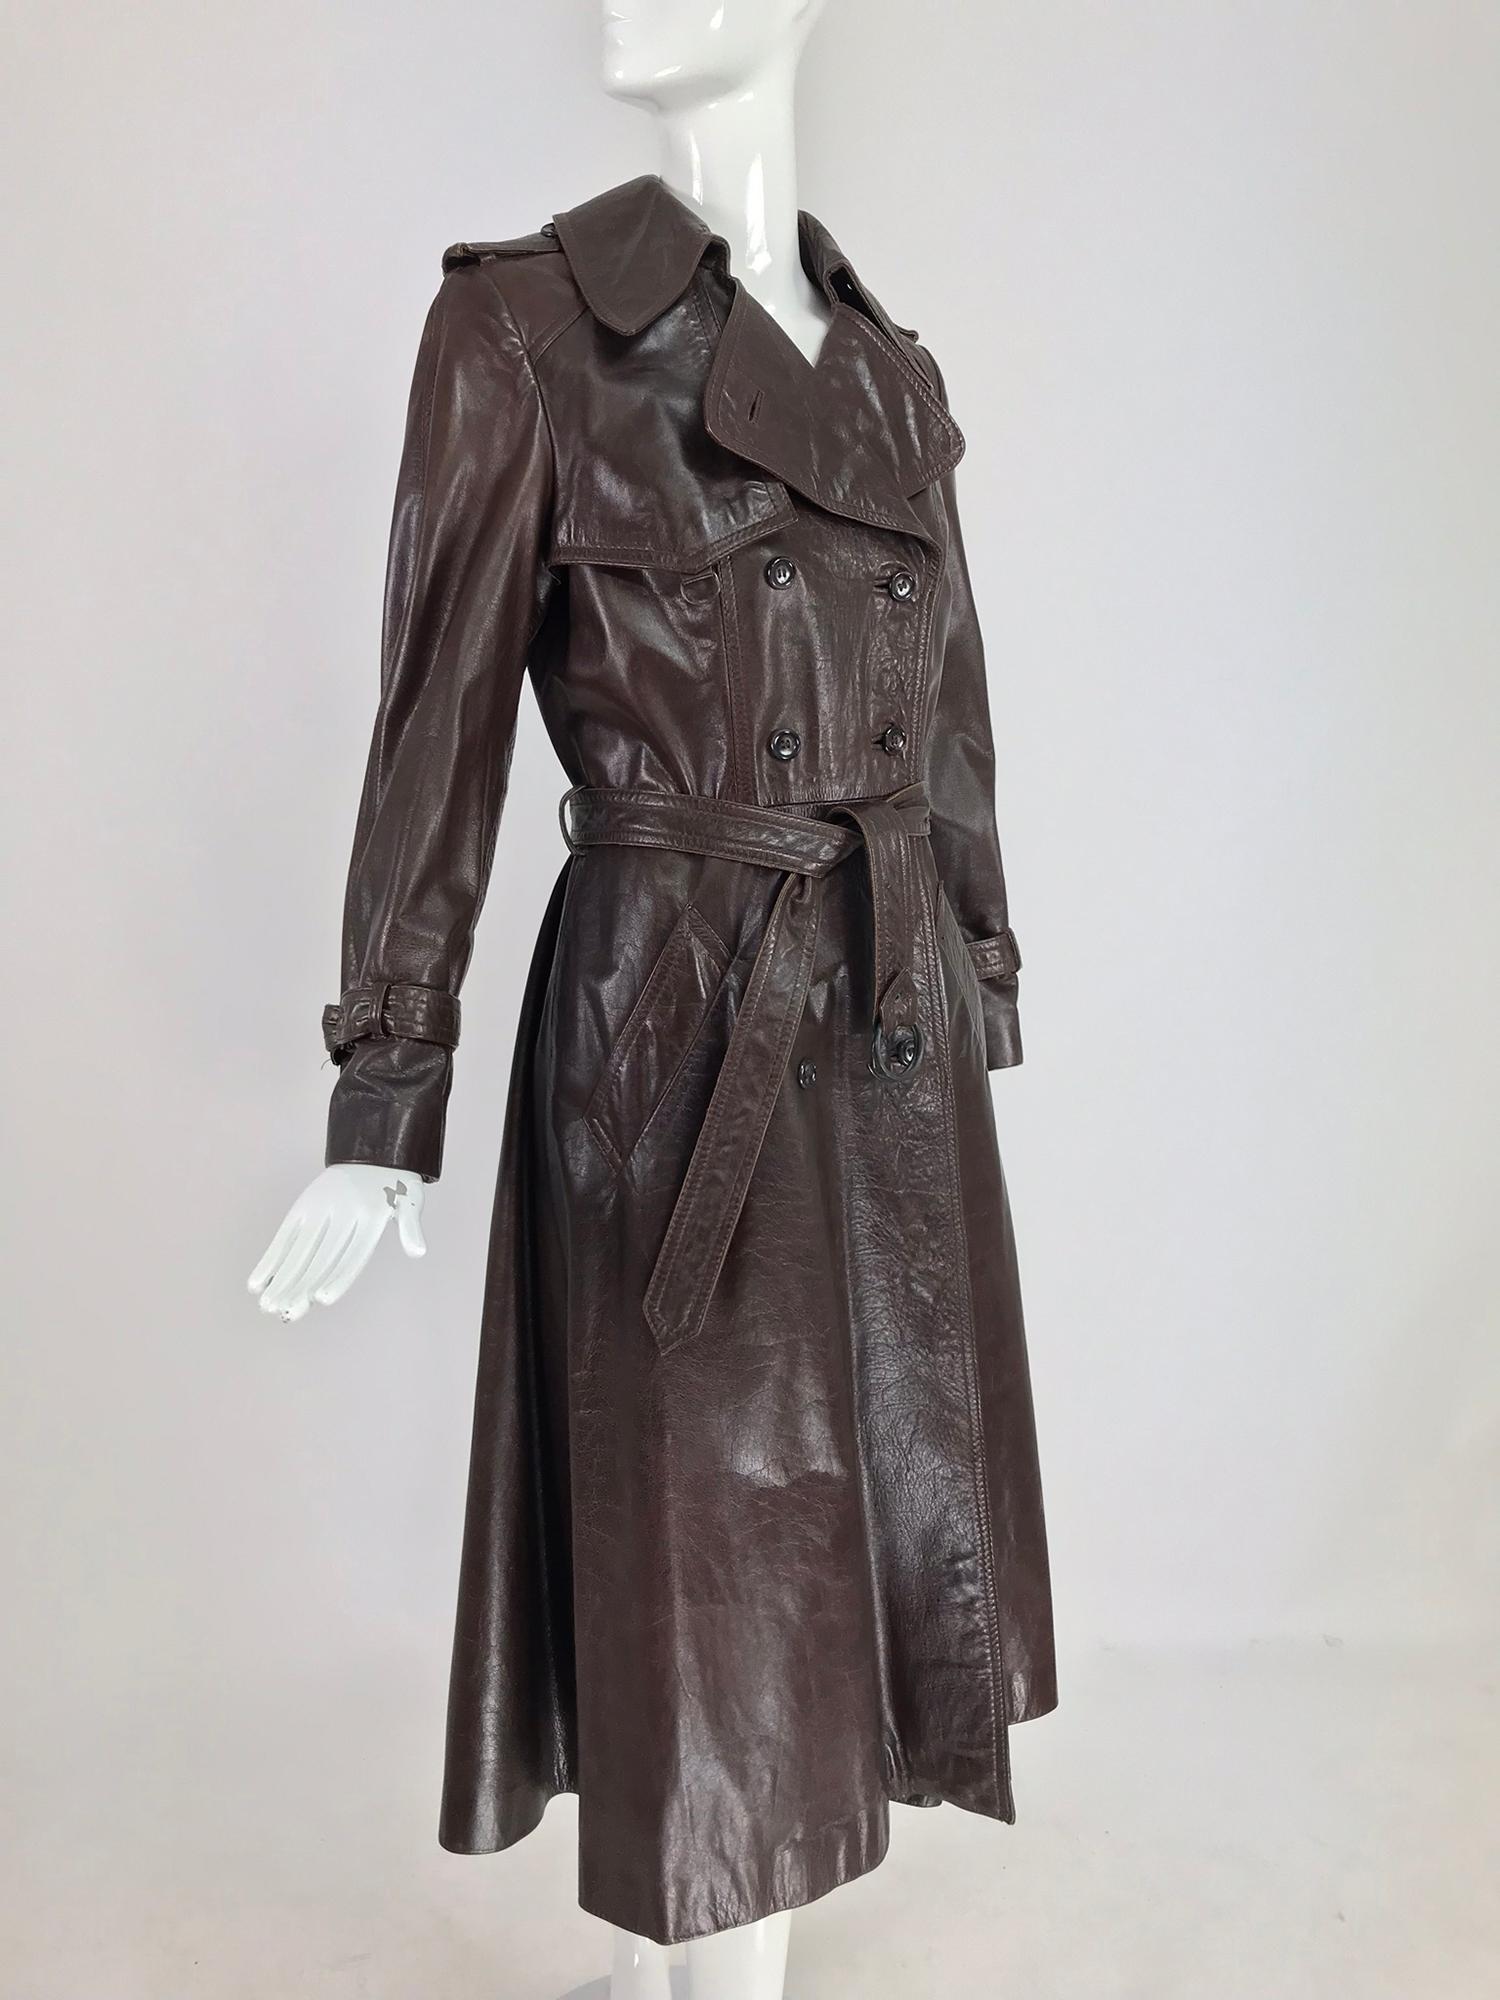 Anne Klein Chocolate brown leather trench coat 1970s 7